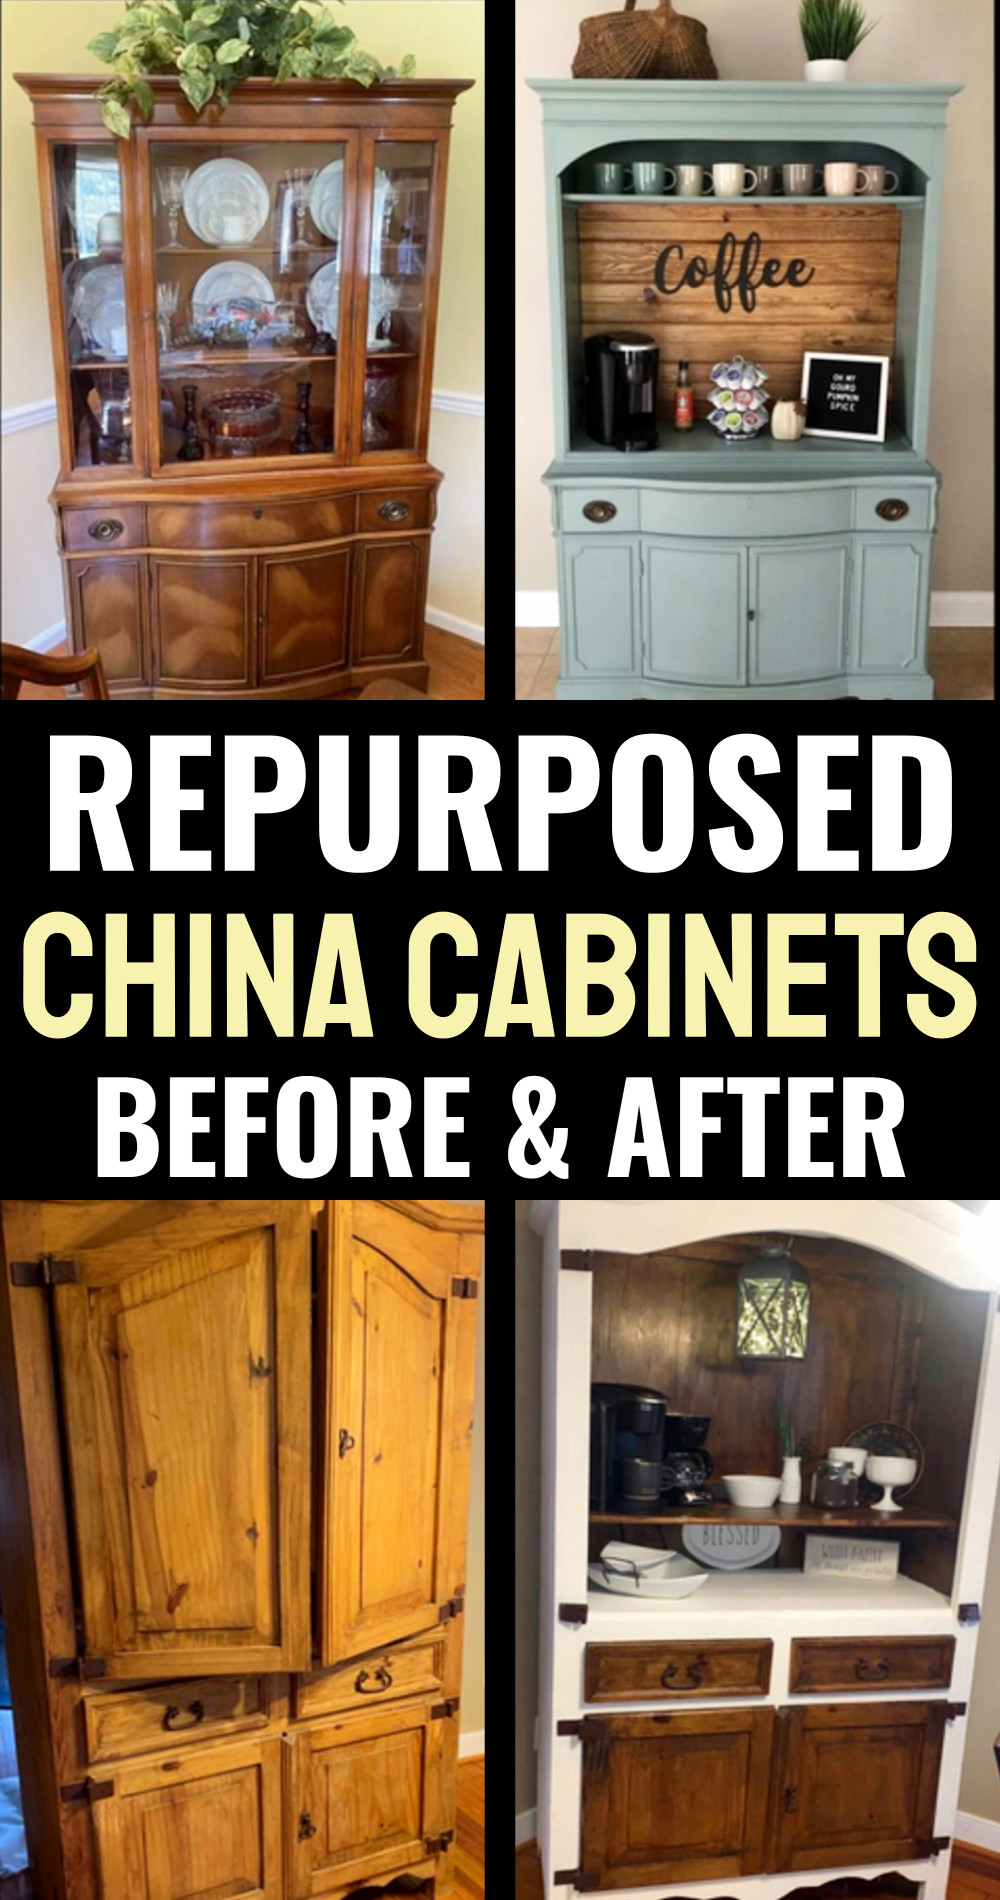 Repurposed China Cabinets Before and After